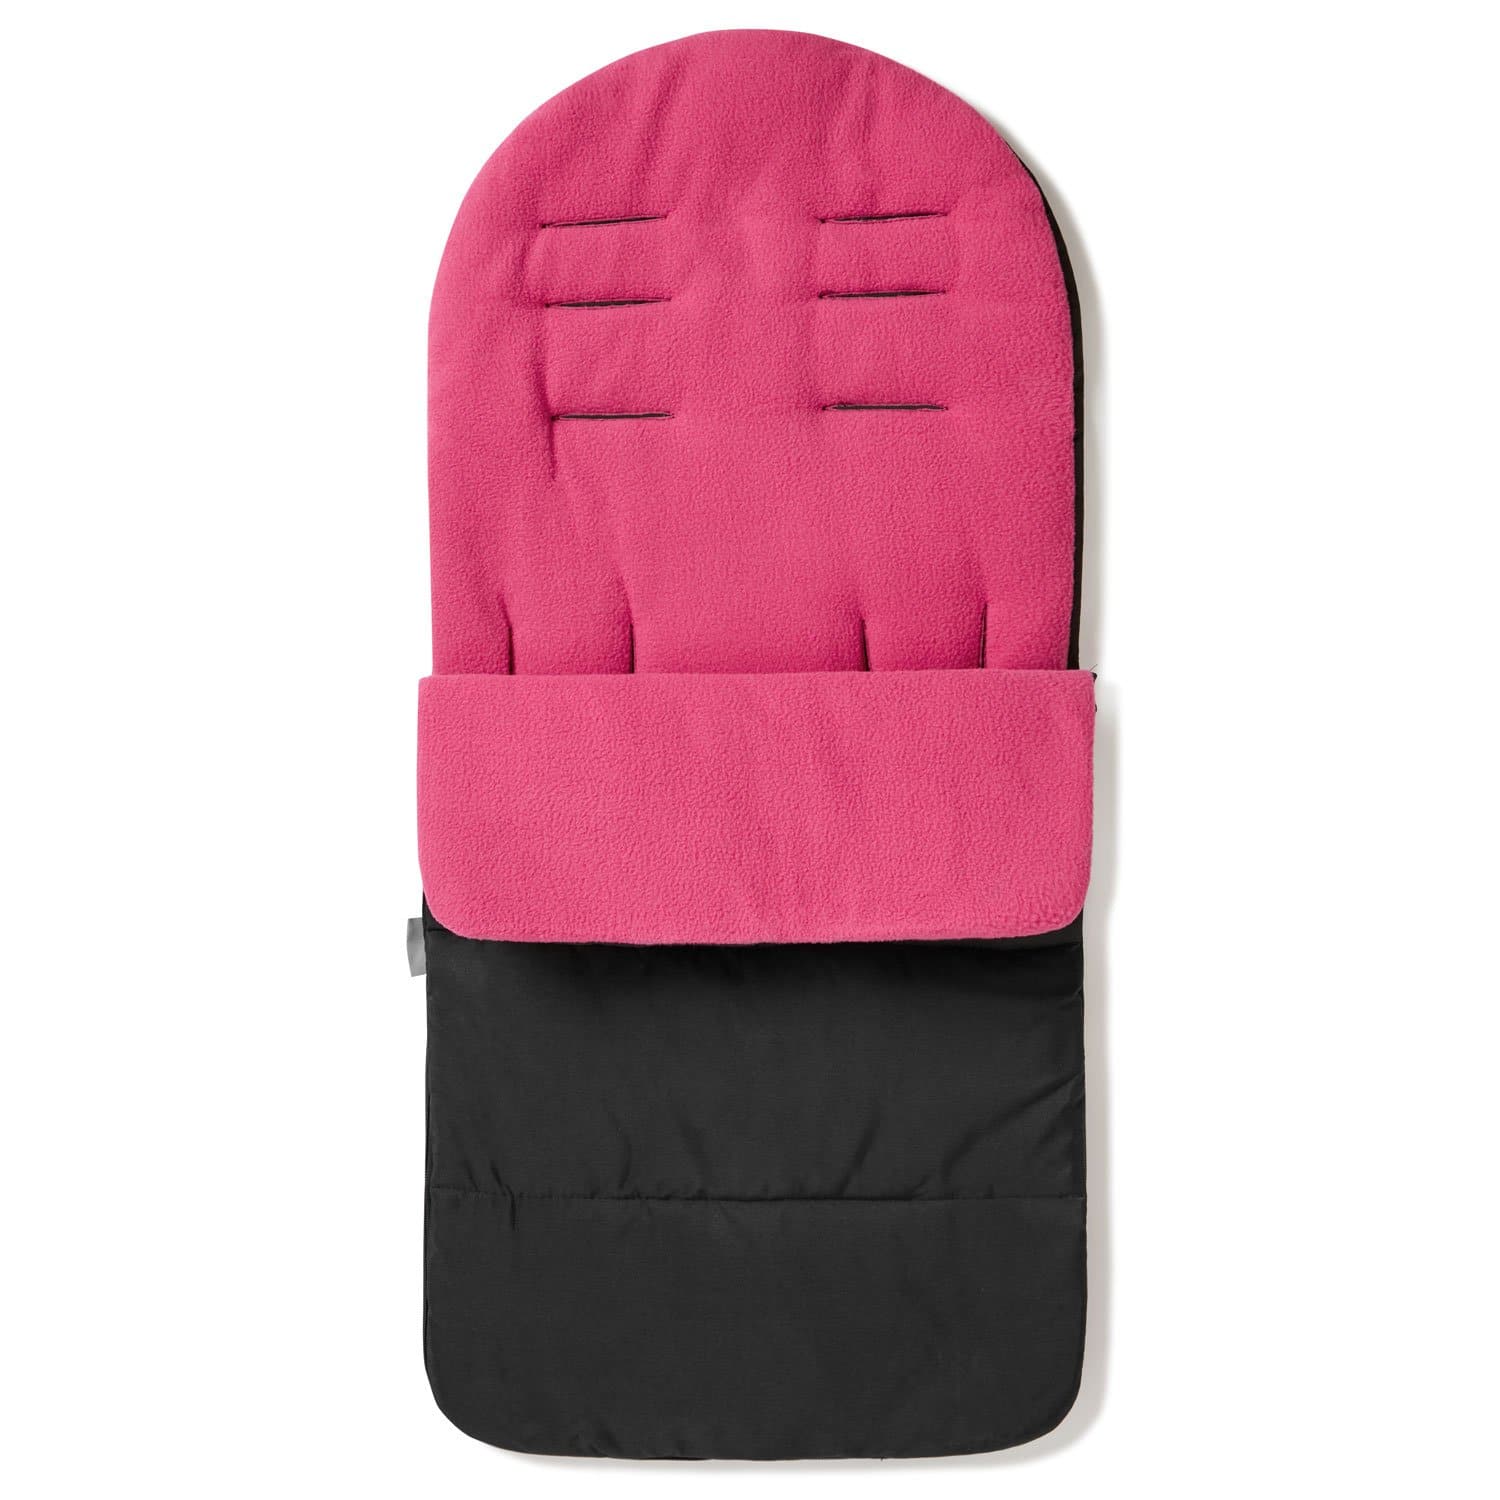 Premium Footmuff / Cosy Toes Compatible with Urban Detour - Pink Rose / Fits All Models | For Your Little One